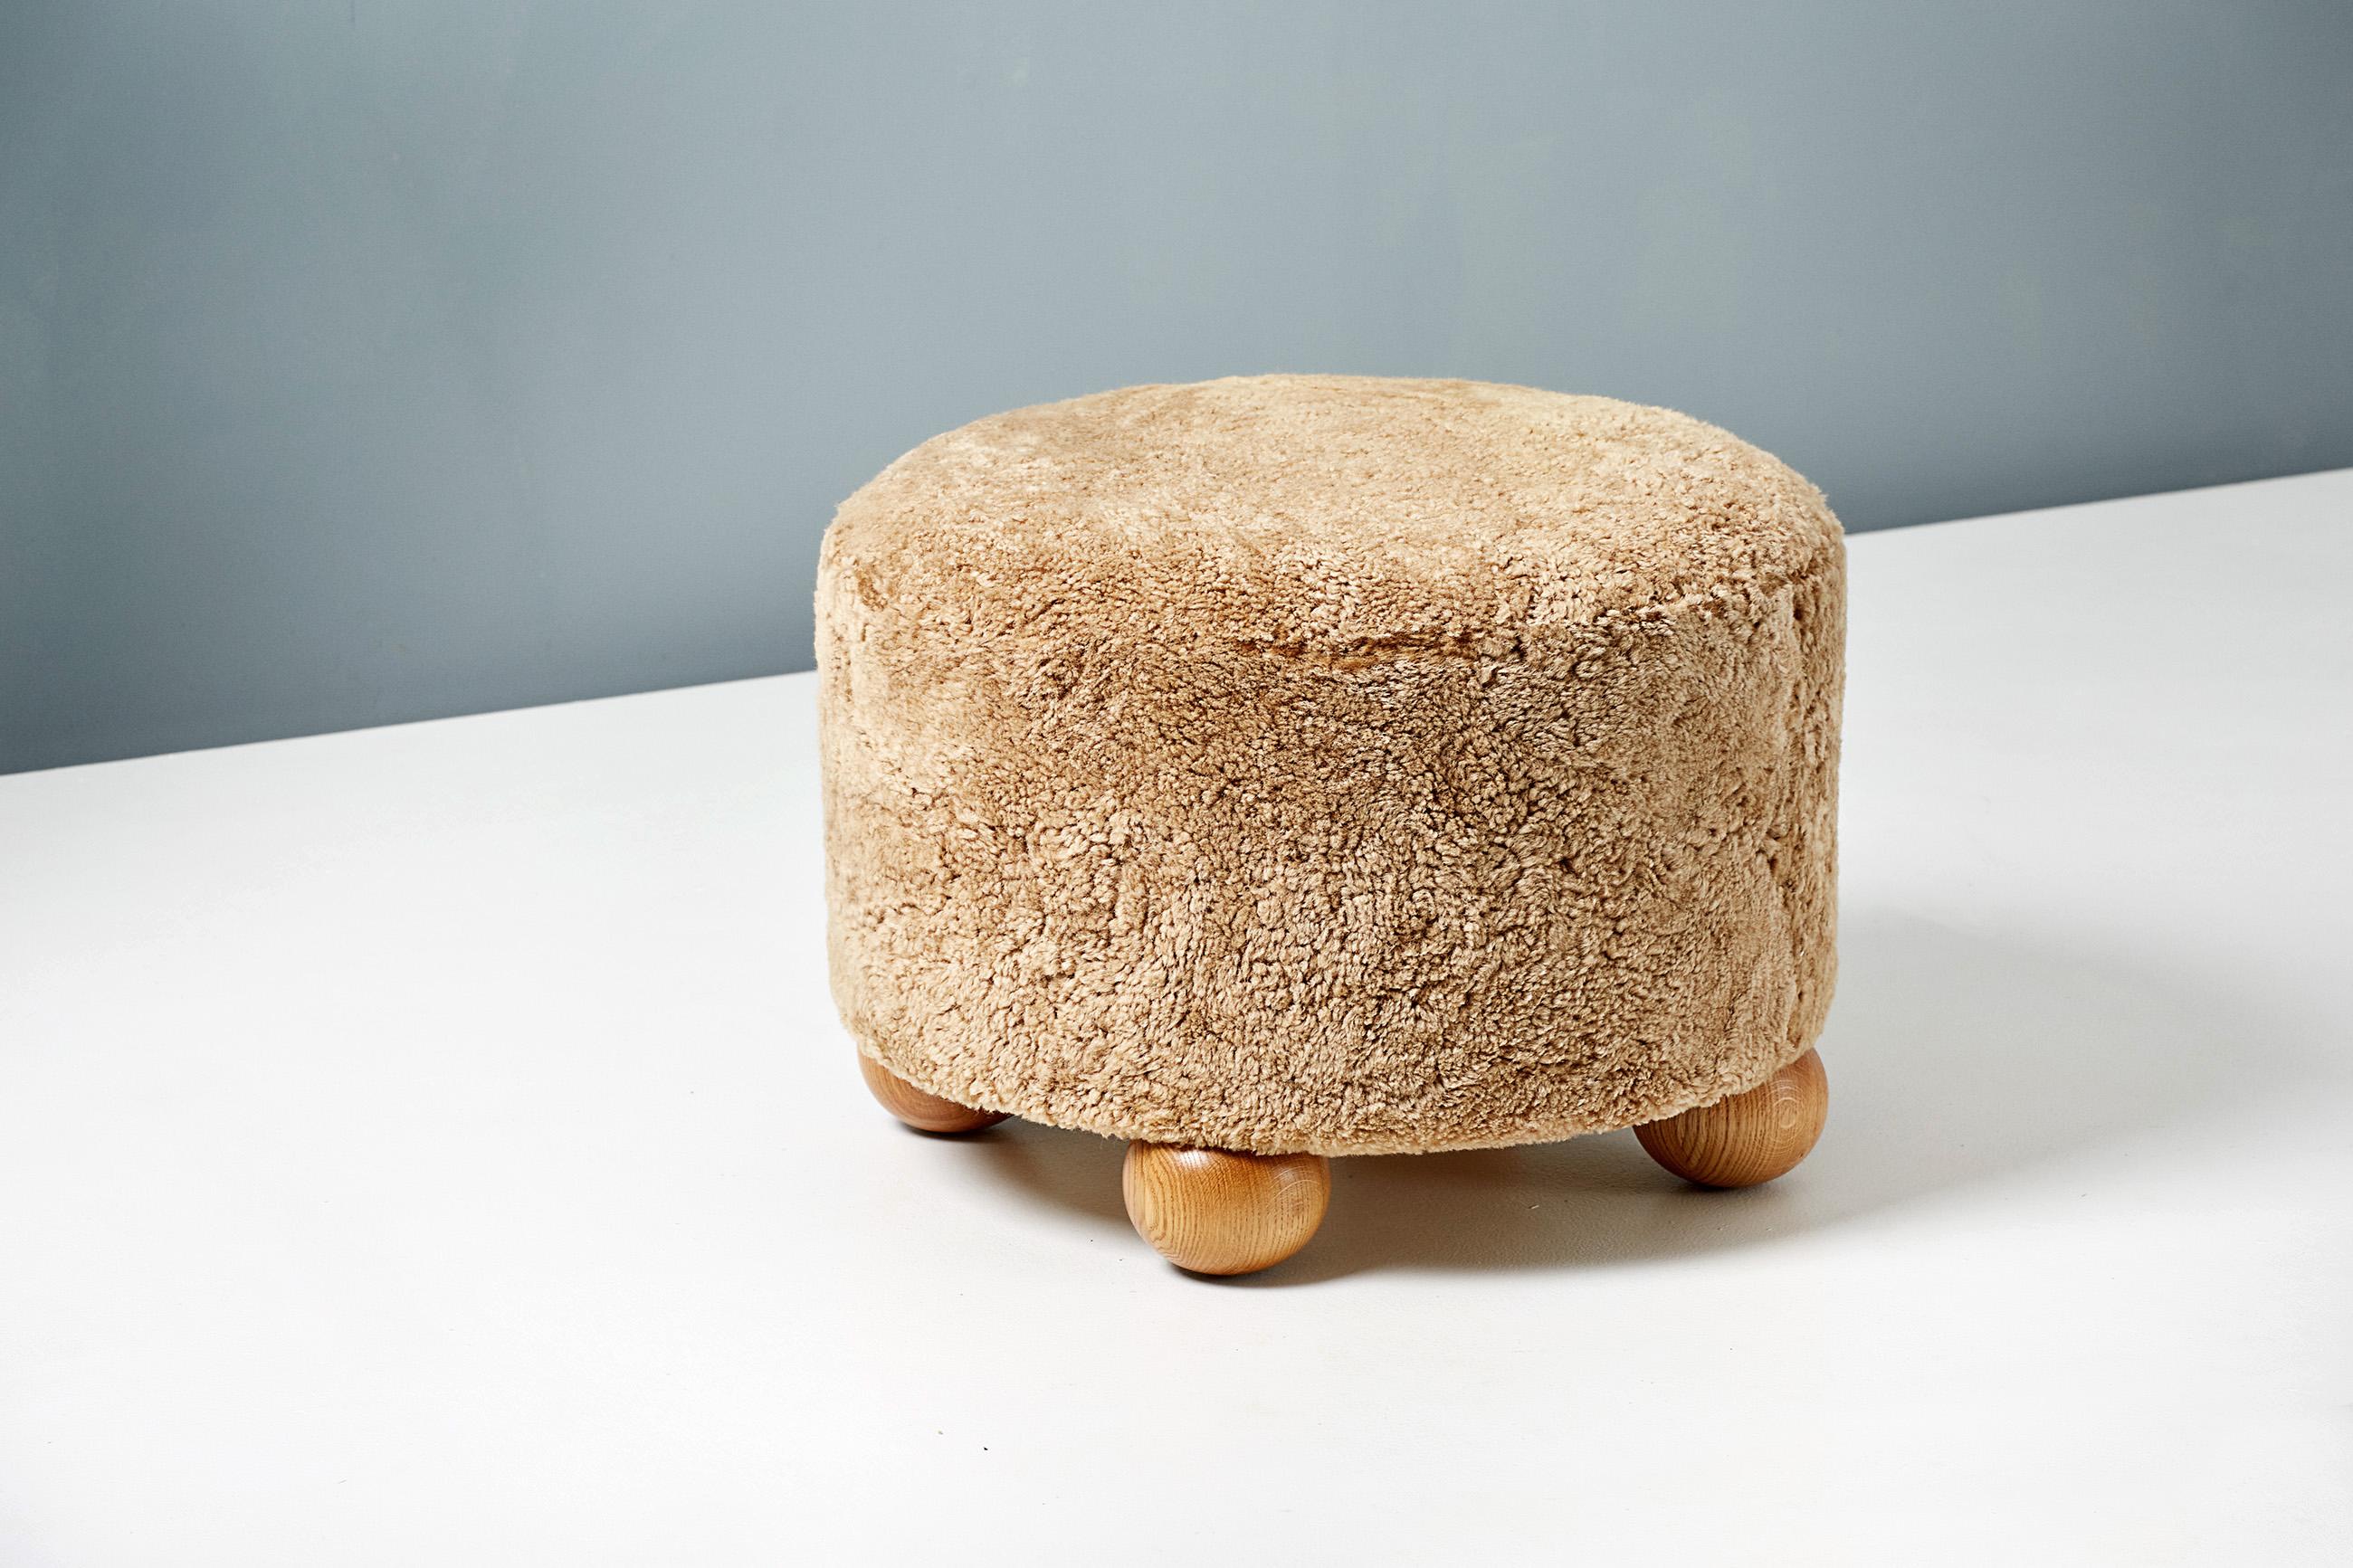 Custom made ottoman developed & produced at our workshops in London using the highest quality materials. This example is upholstered in a Honey colored sheepskin and features oiled oak ball feet. 

Custom XL Size: 

Diameter = 33.5